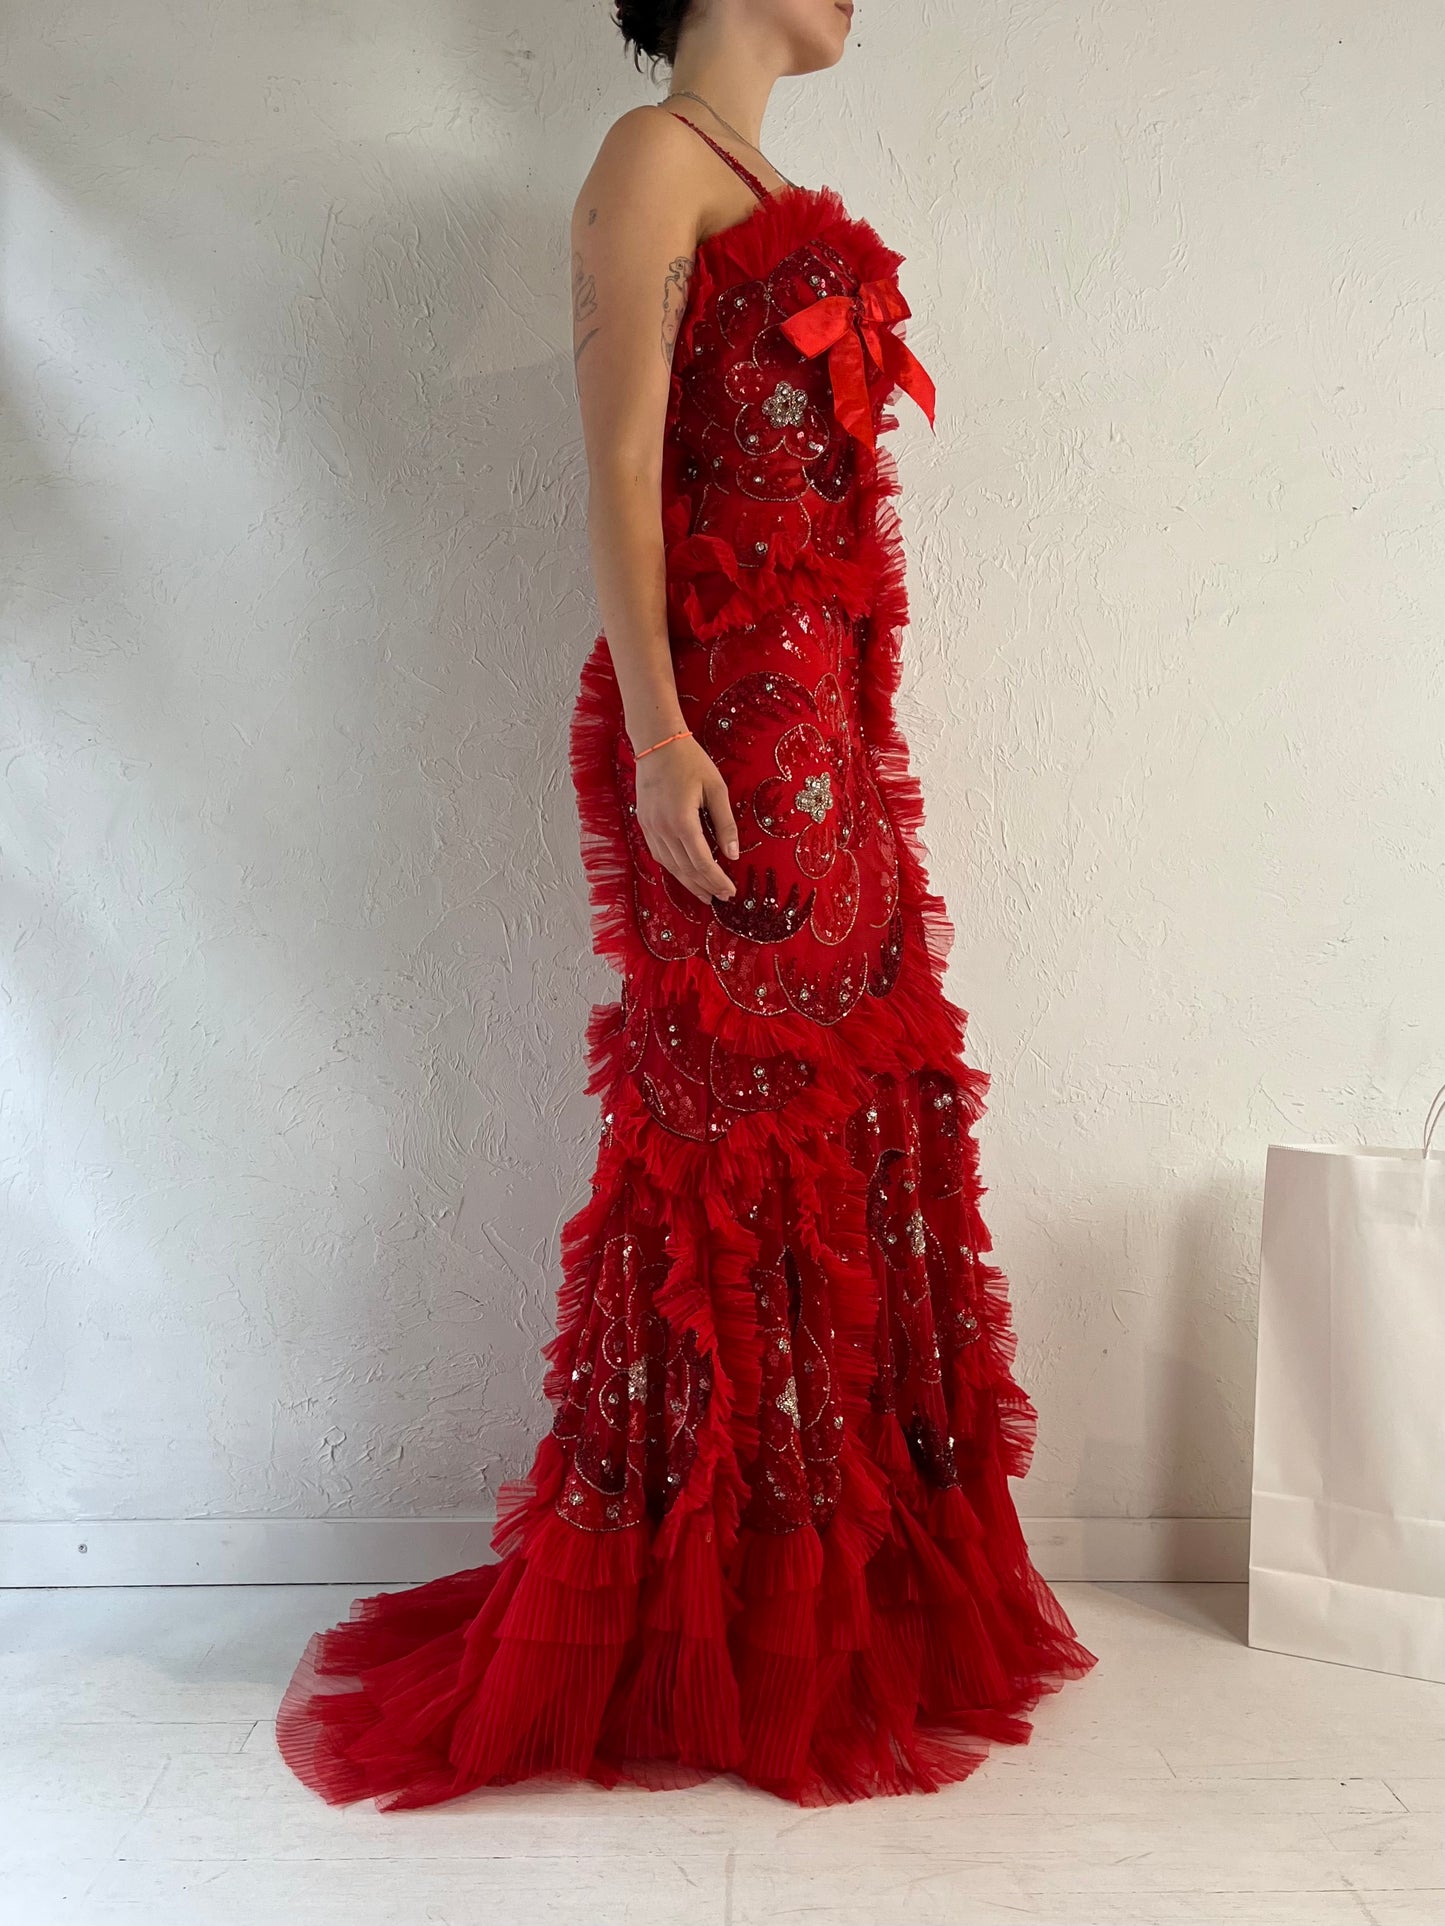 Vintage 'Shakez' Red Beaded Formal Gown / Small